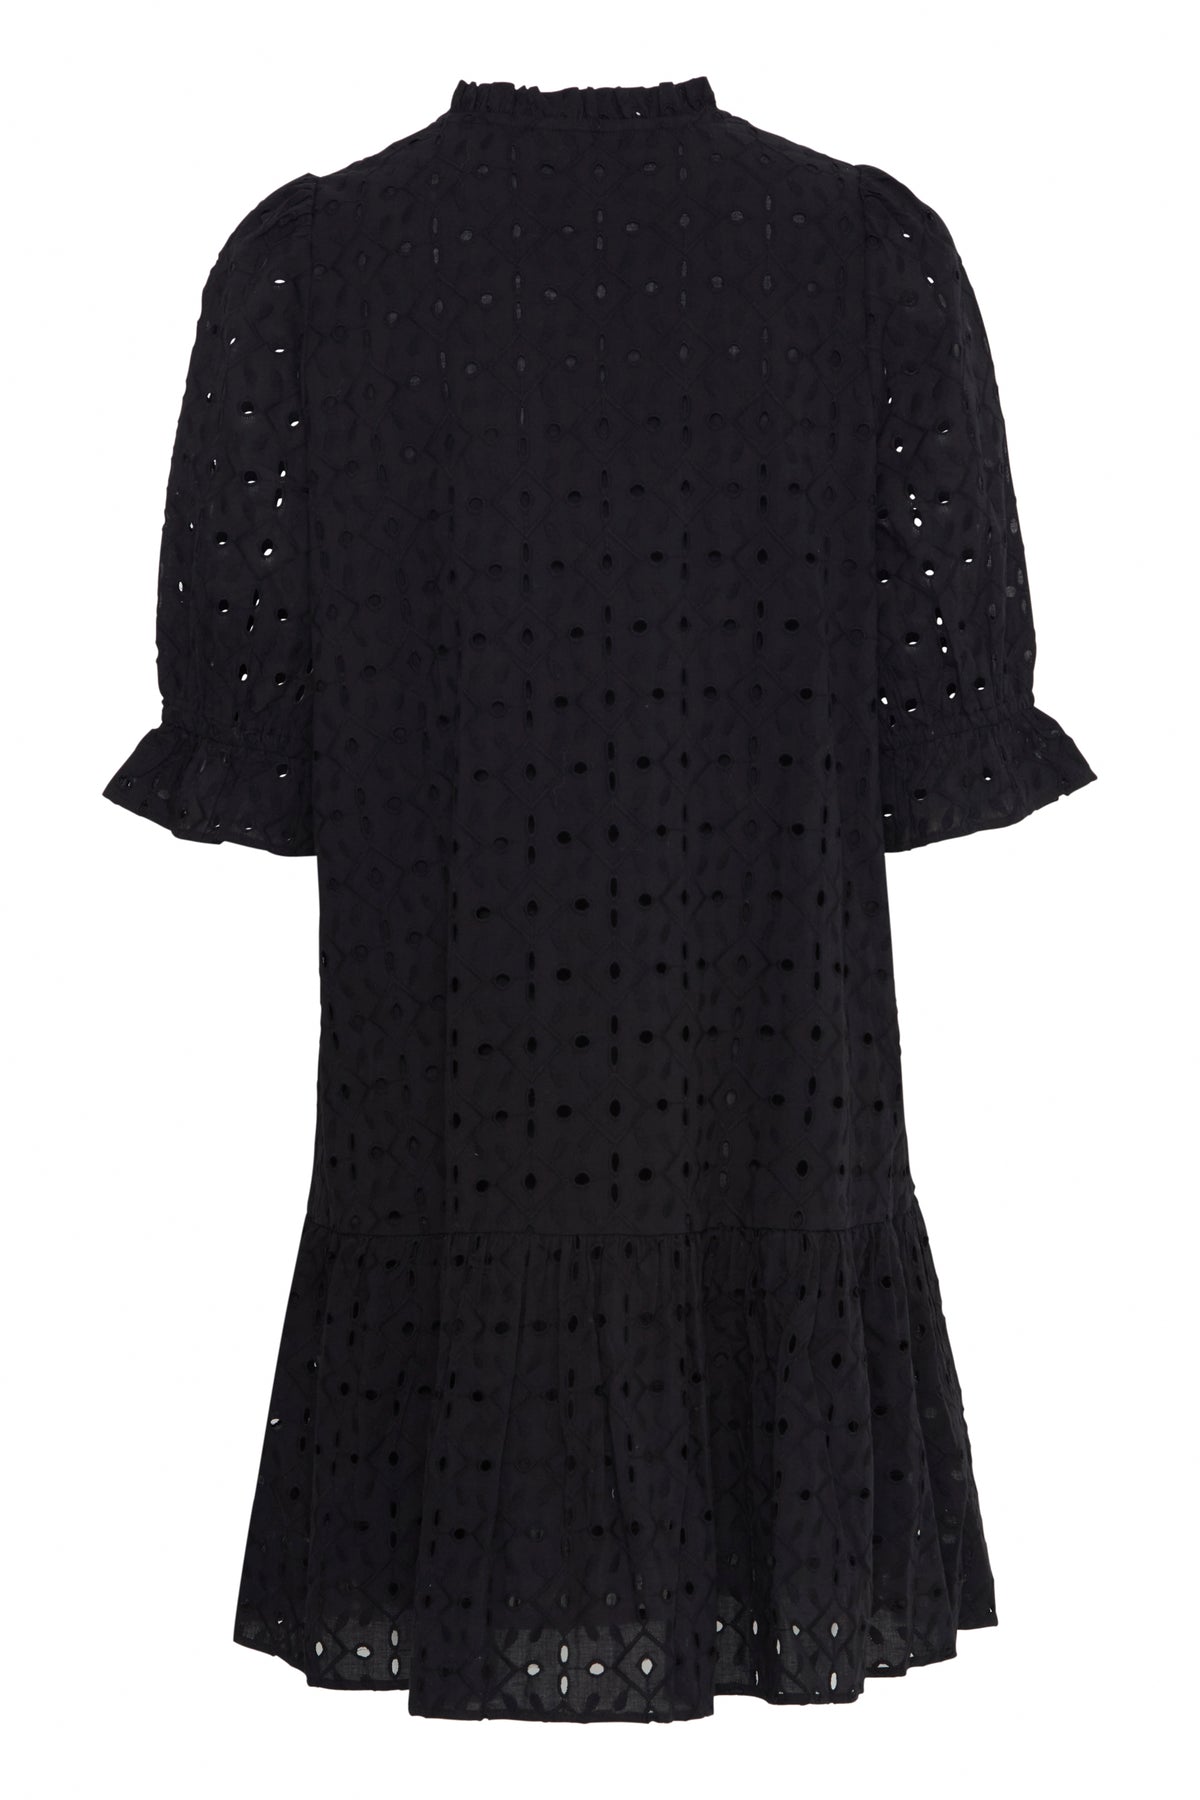 B.Young Bygalla Black Embroidered Layered Dress, 20814935